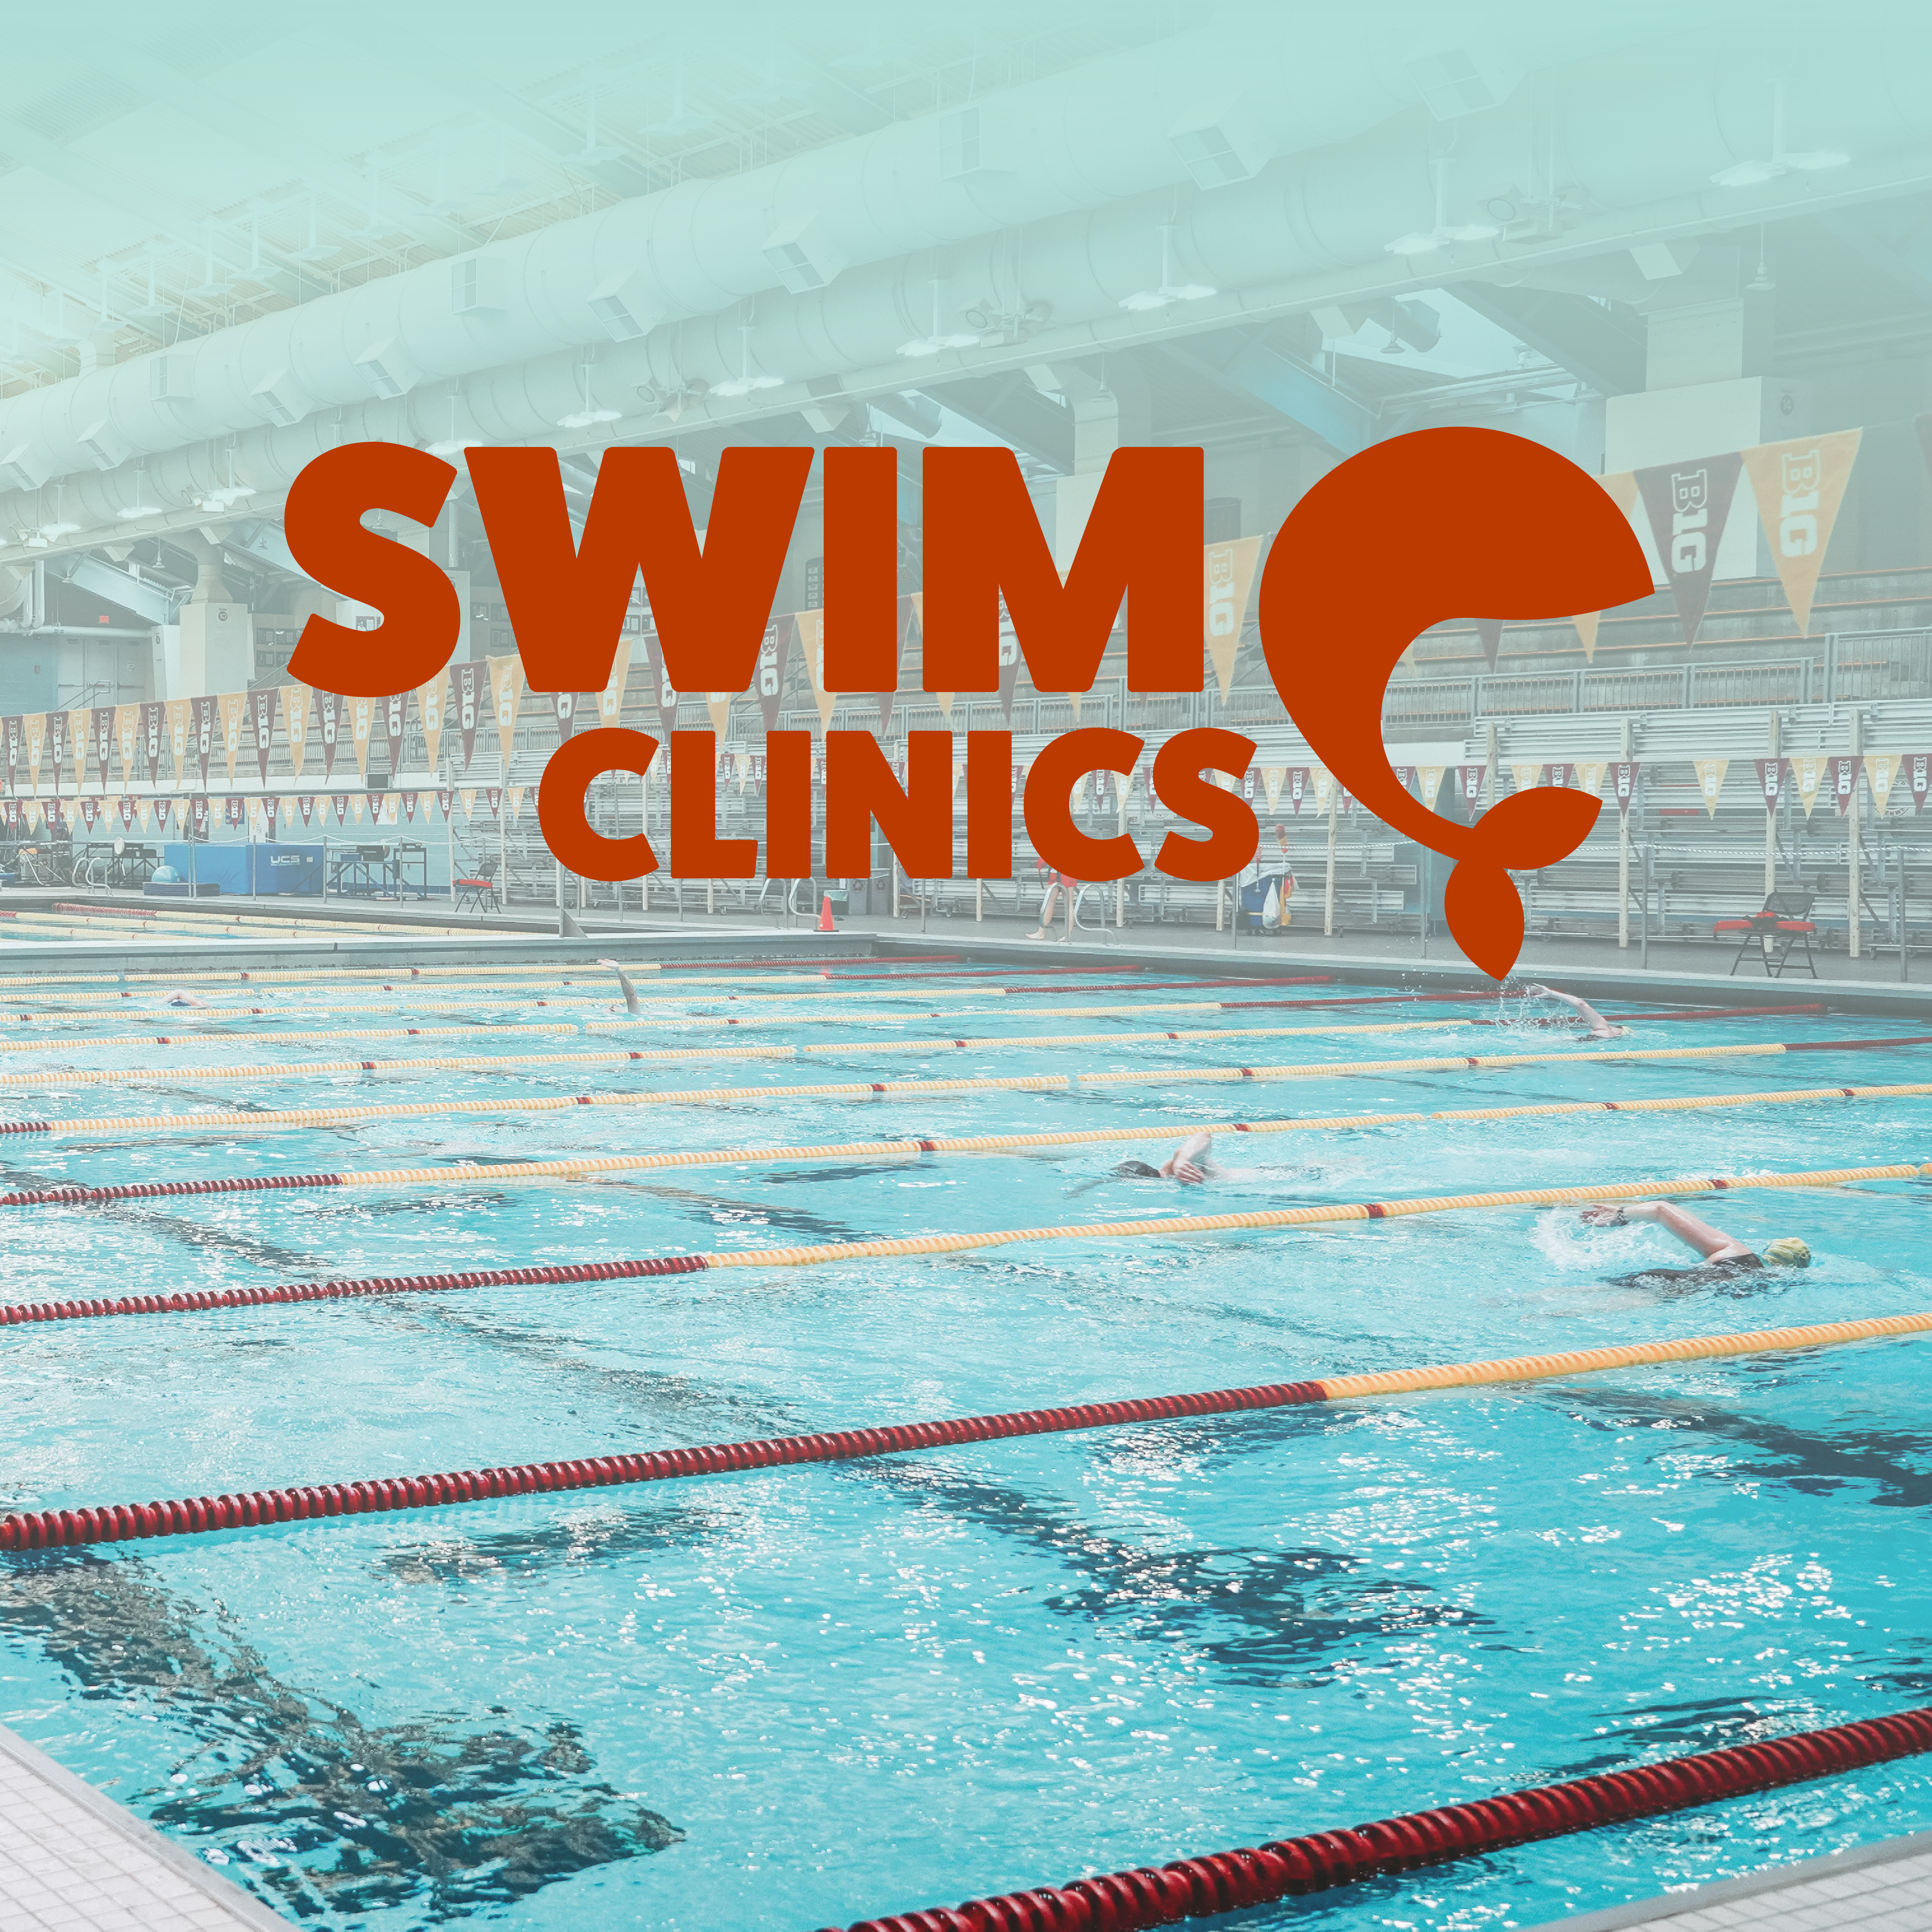 Wide view of the pool with swimmers in lanes with text "swim clinics"